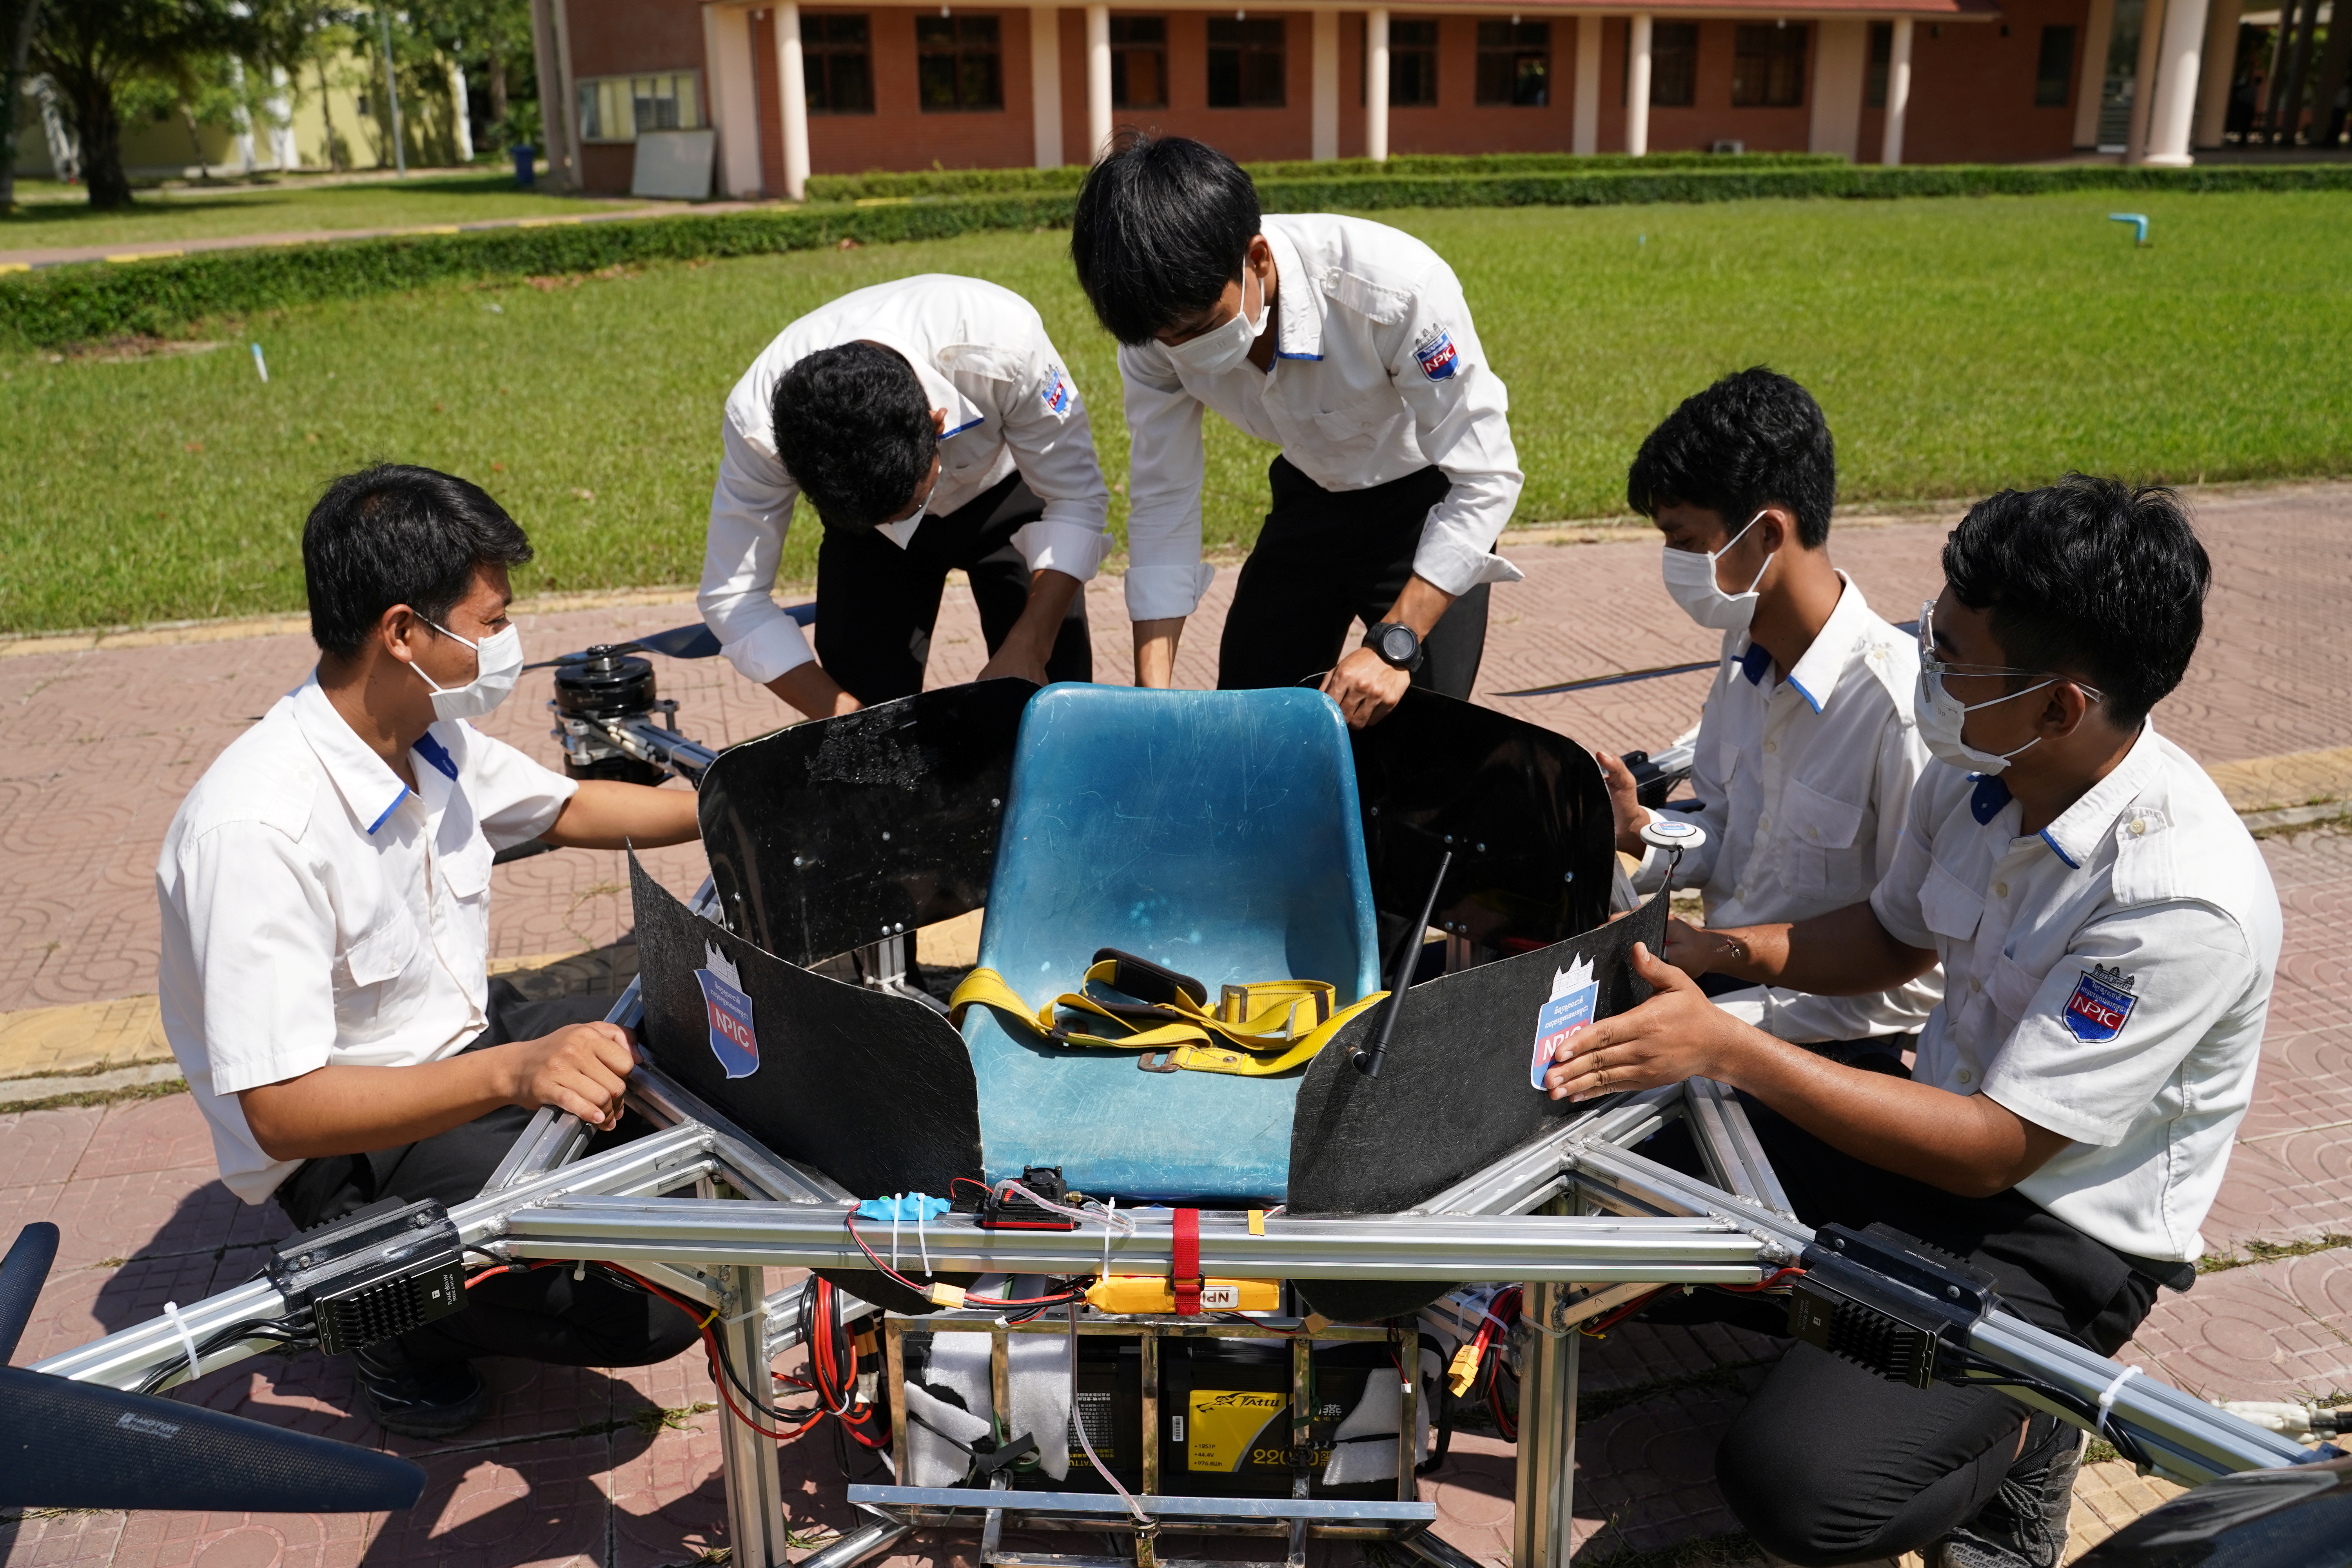 Students of the National Polytechnic Institute of Cambodia prepare their manned drone for flight in Phnom Penh, Cambodia, September 17, 2021. REUTERS/Cindy Liu